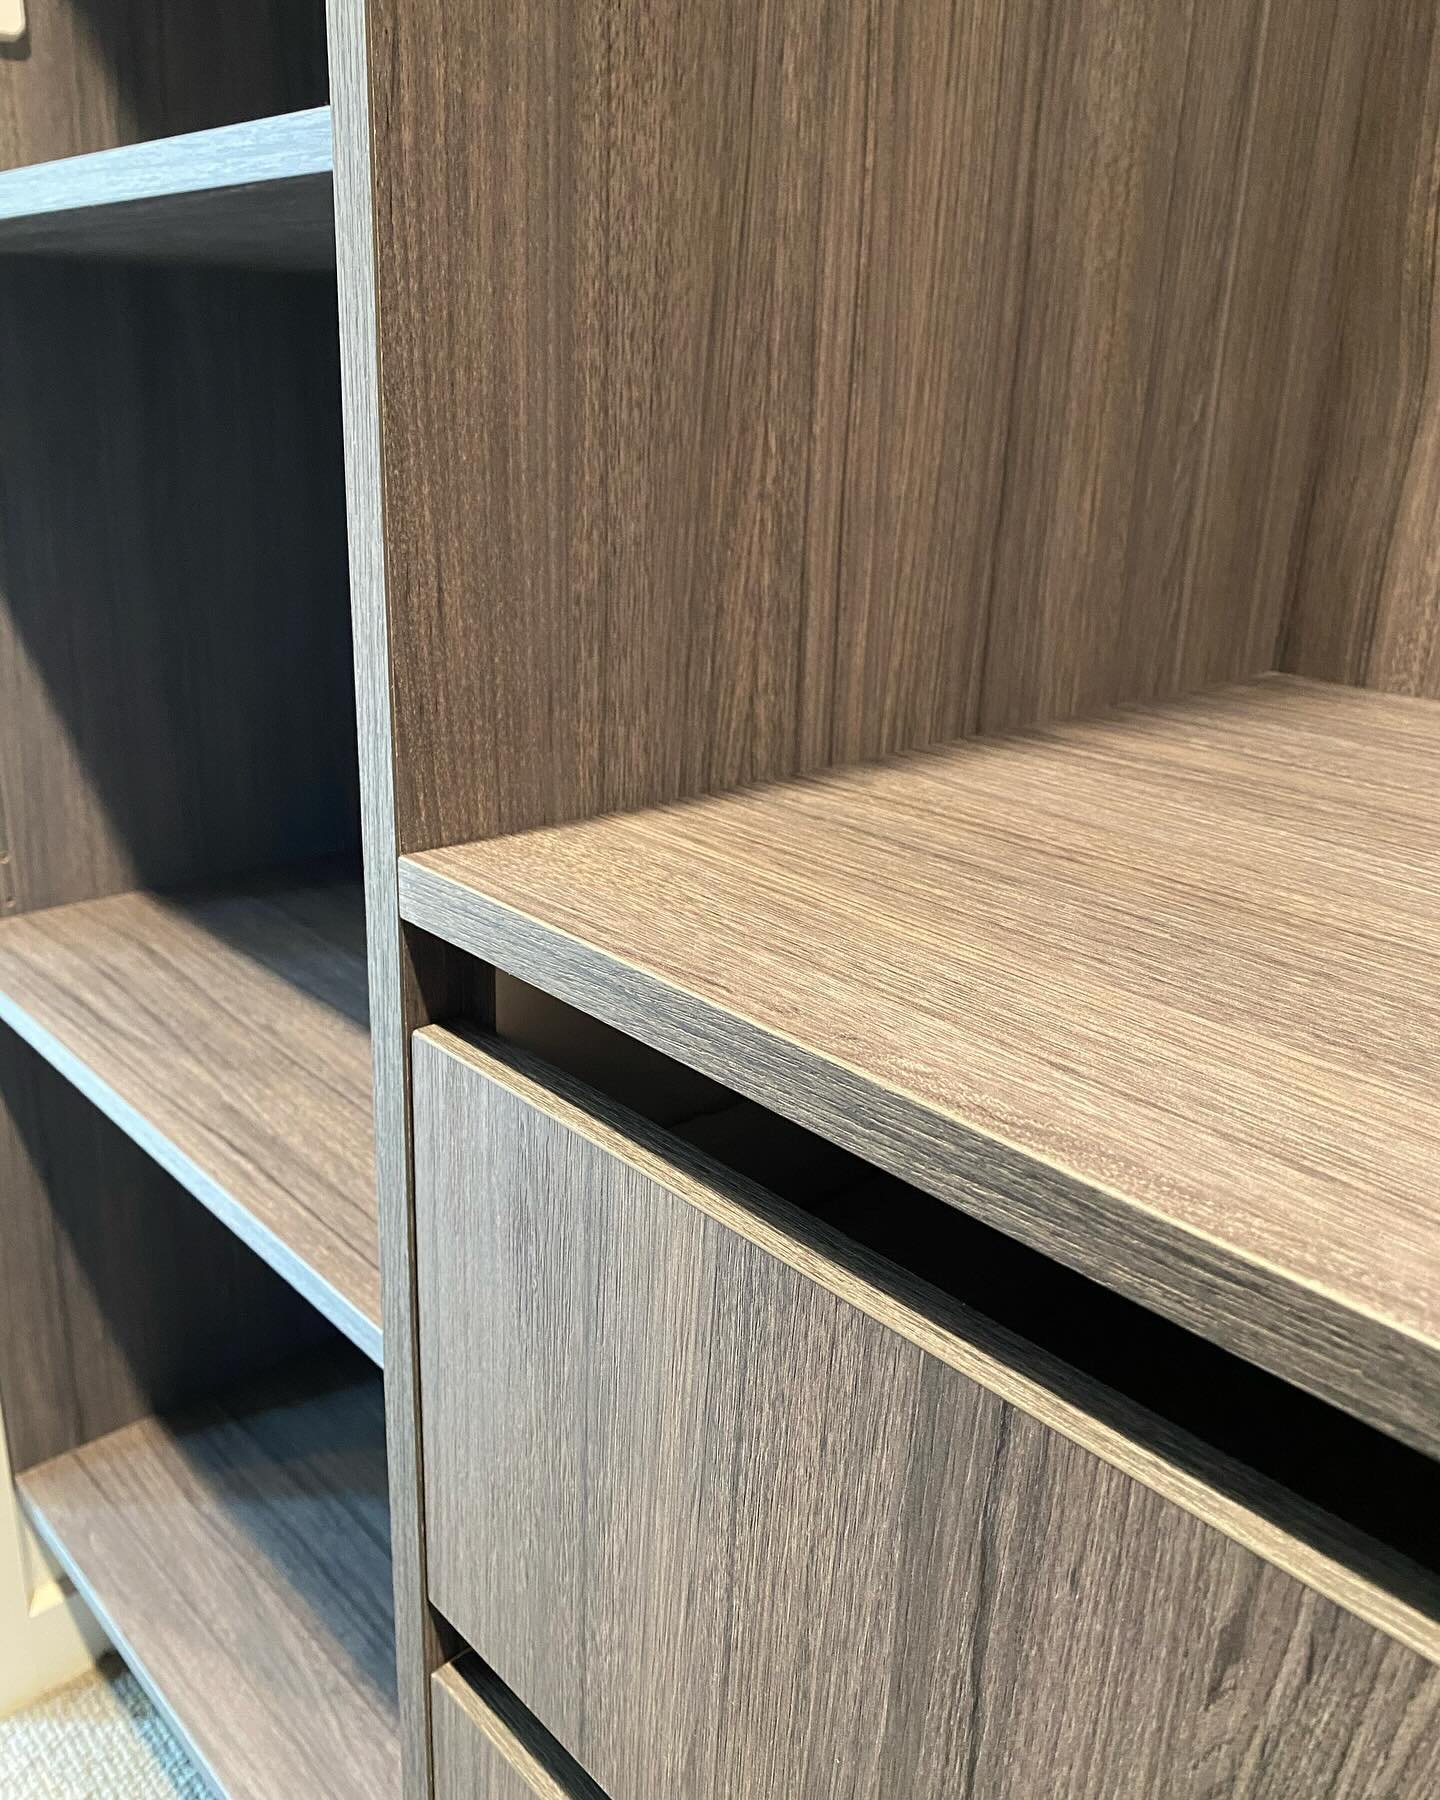 Close-up walk in wardrobe details 🙌🏽 
Custom cabinetry in Smoked Ash from Bestwood

#hawkesbayjoinery #highendjoinery #hawkesbaybusiness #hawkesbaytrades #tradienz #customjoinery #bespokecabinetry #walkinwardrobe #highendjoinery #hbbusiness
Walk in